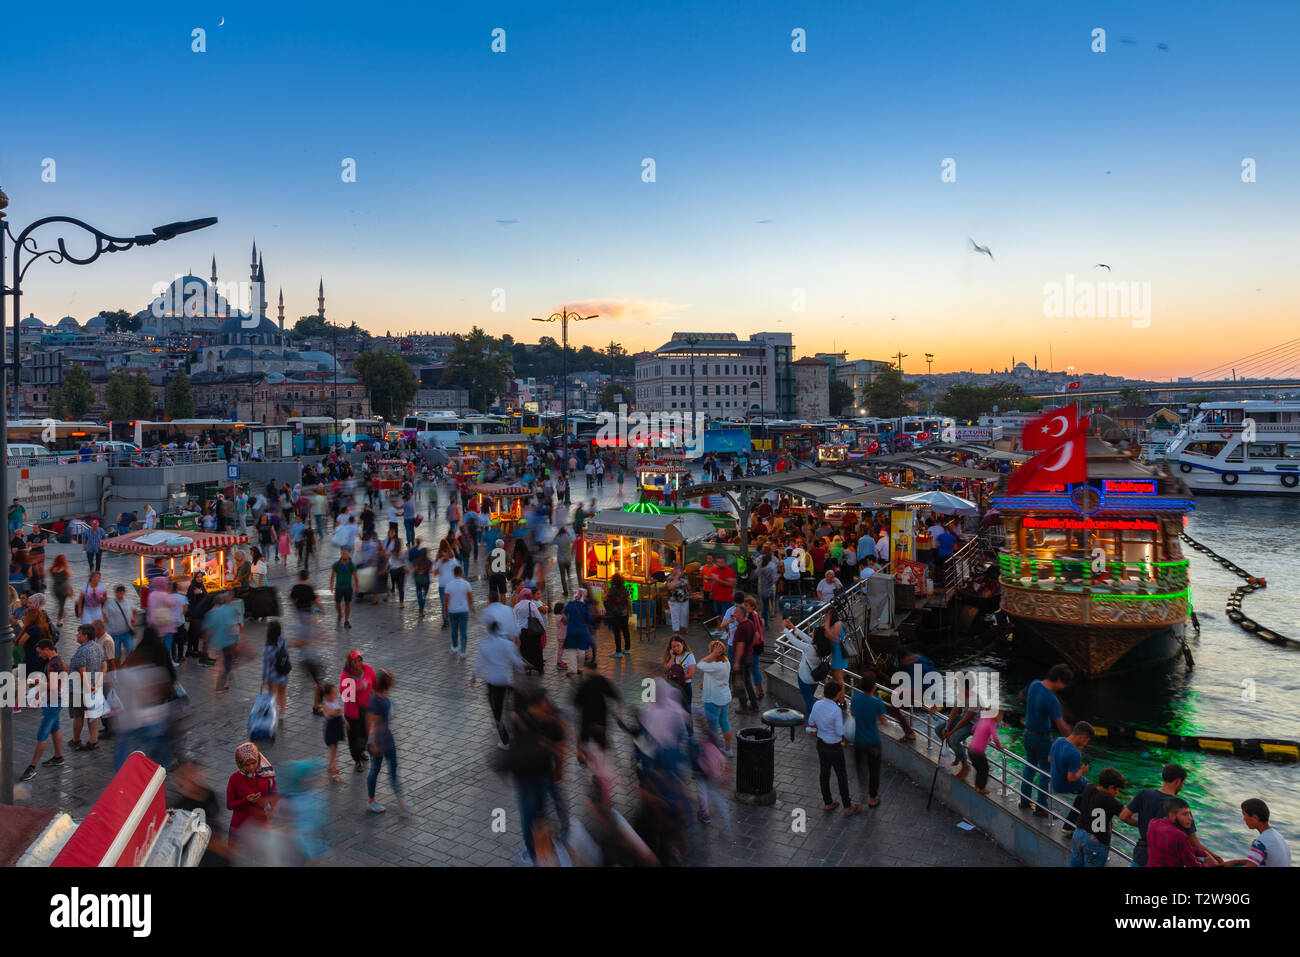 Istanbul, Turkey - August 14, 2018: People eat and walk at the Eminonu Square at dusk on August 14, 2018 in Istanbul, Turkey Stock Photo